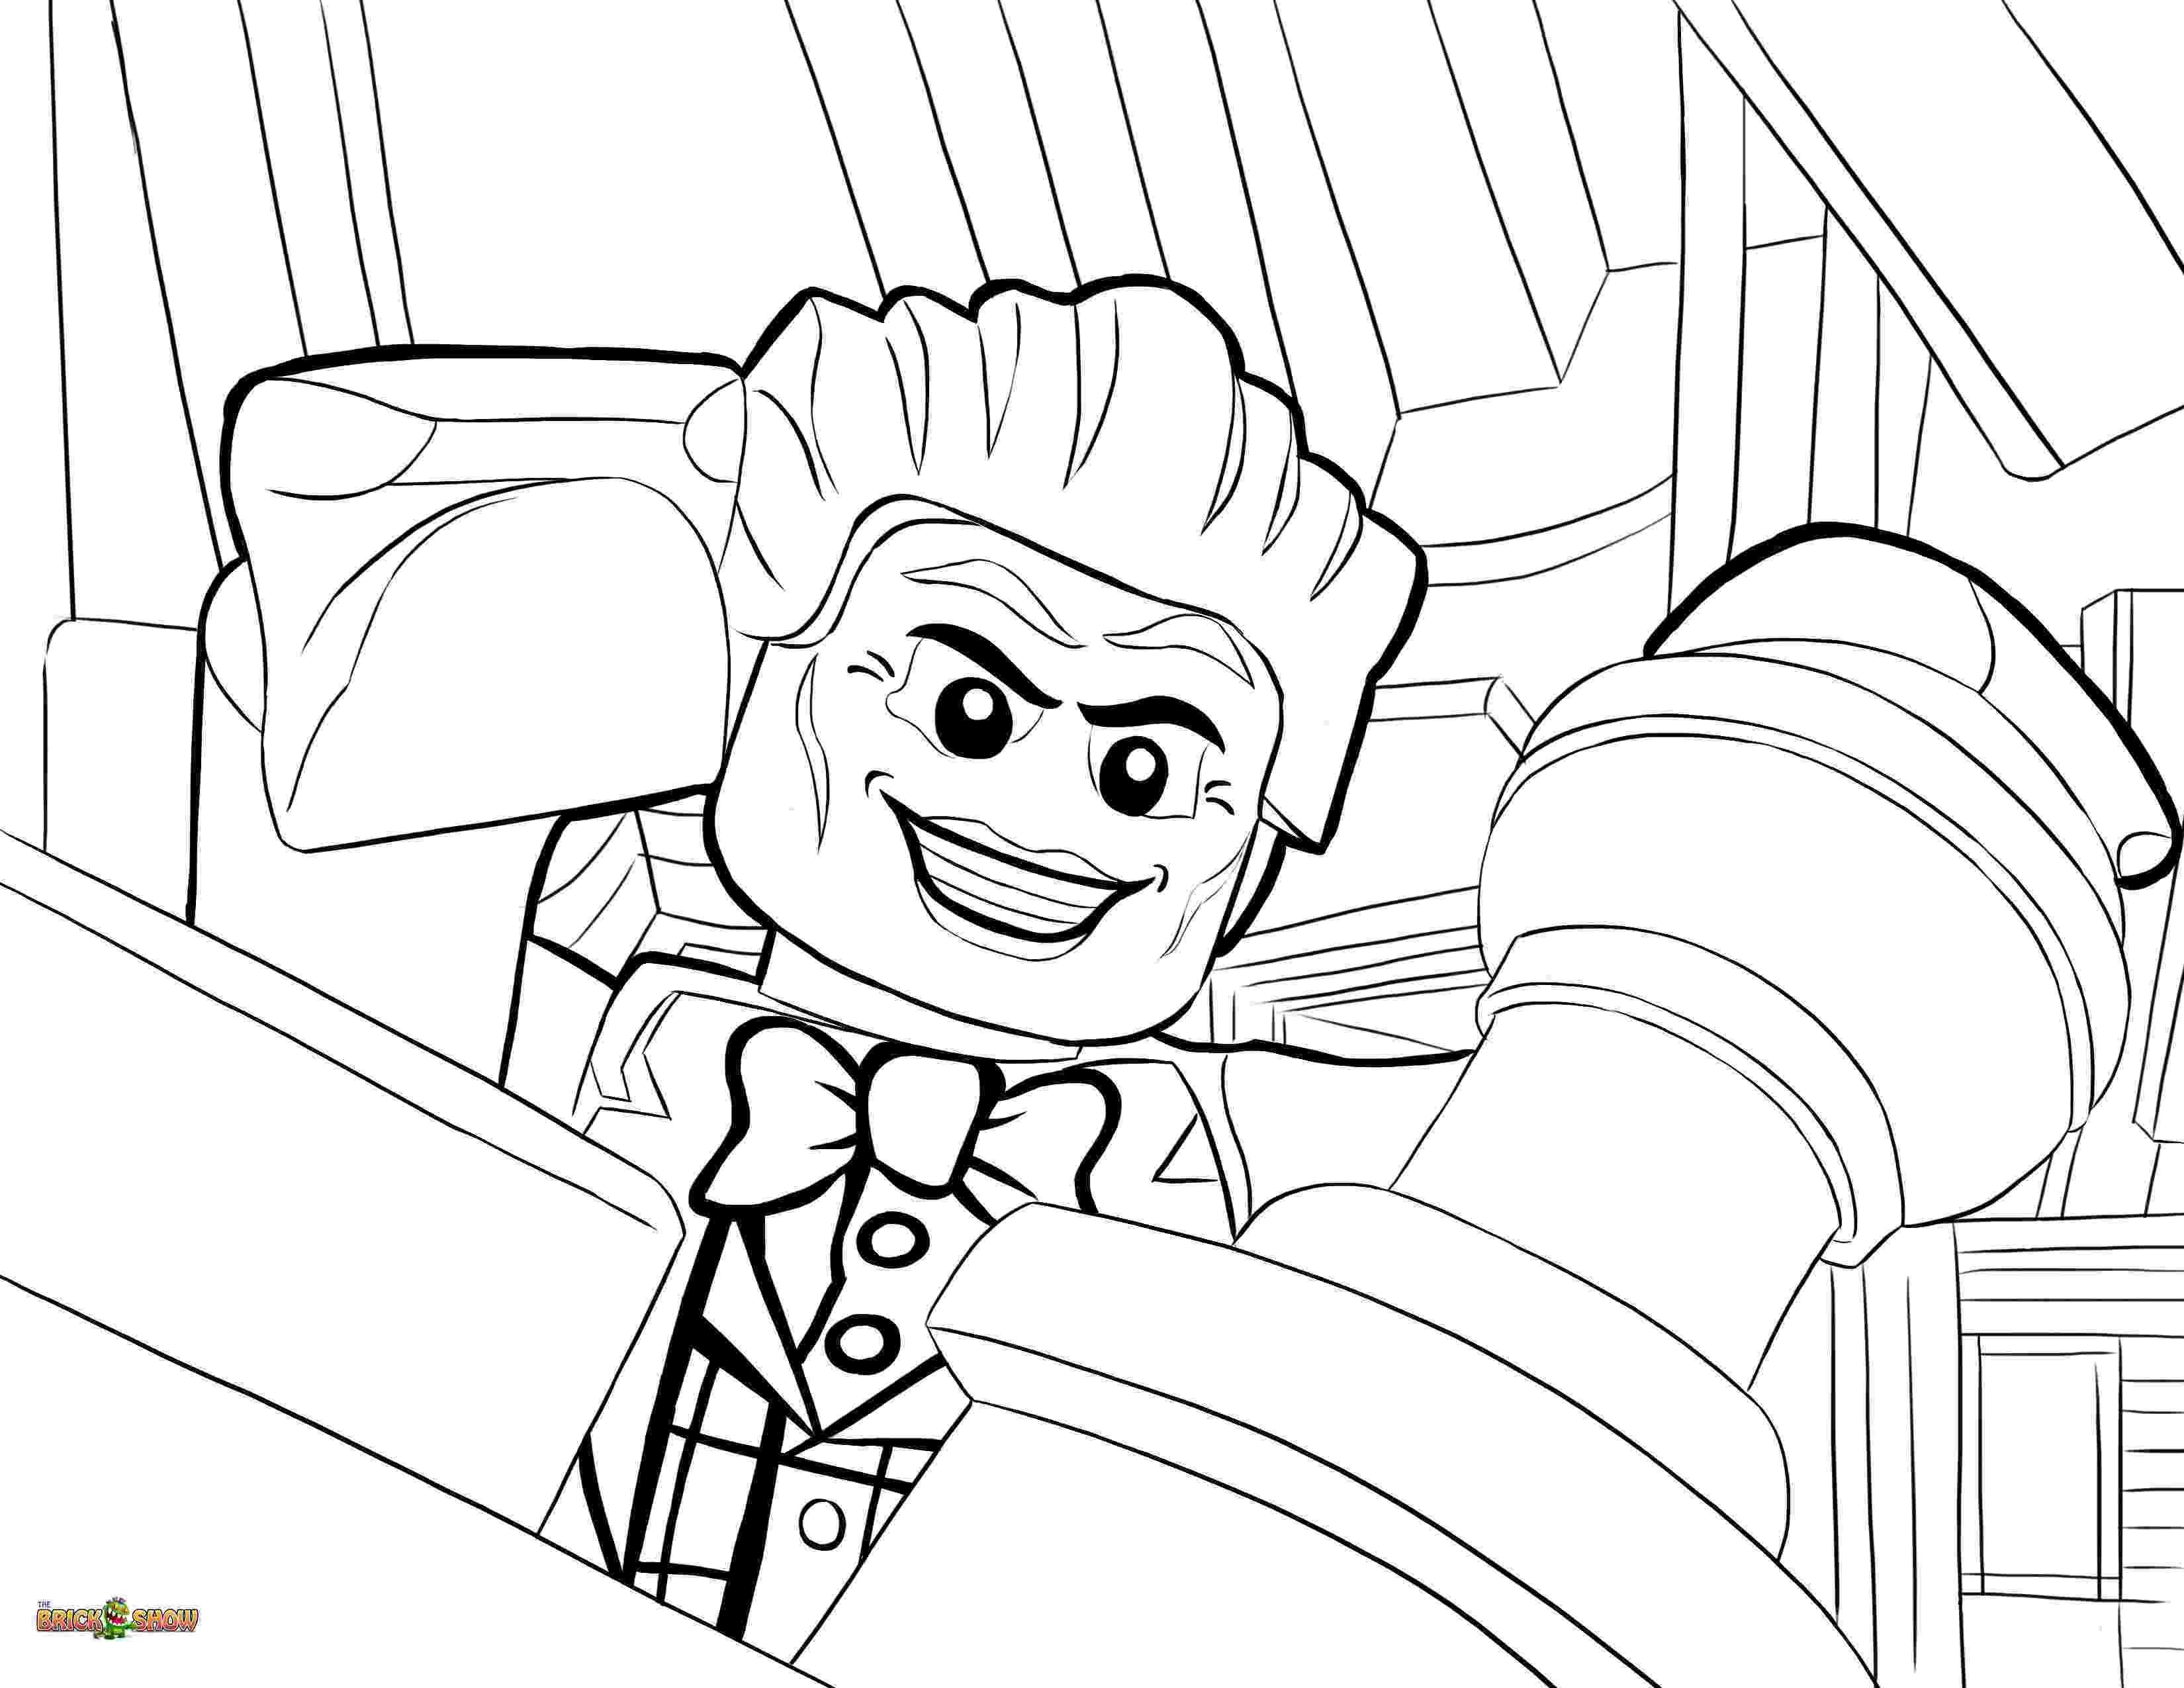 joker coloring pages printable joker coloring pages best coloring pages for kids joker coloring printable pages 